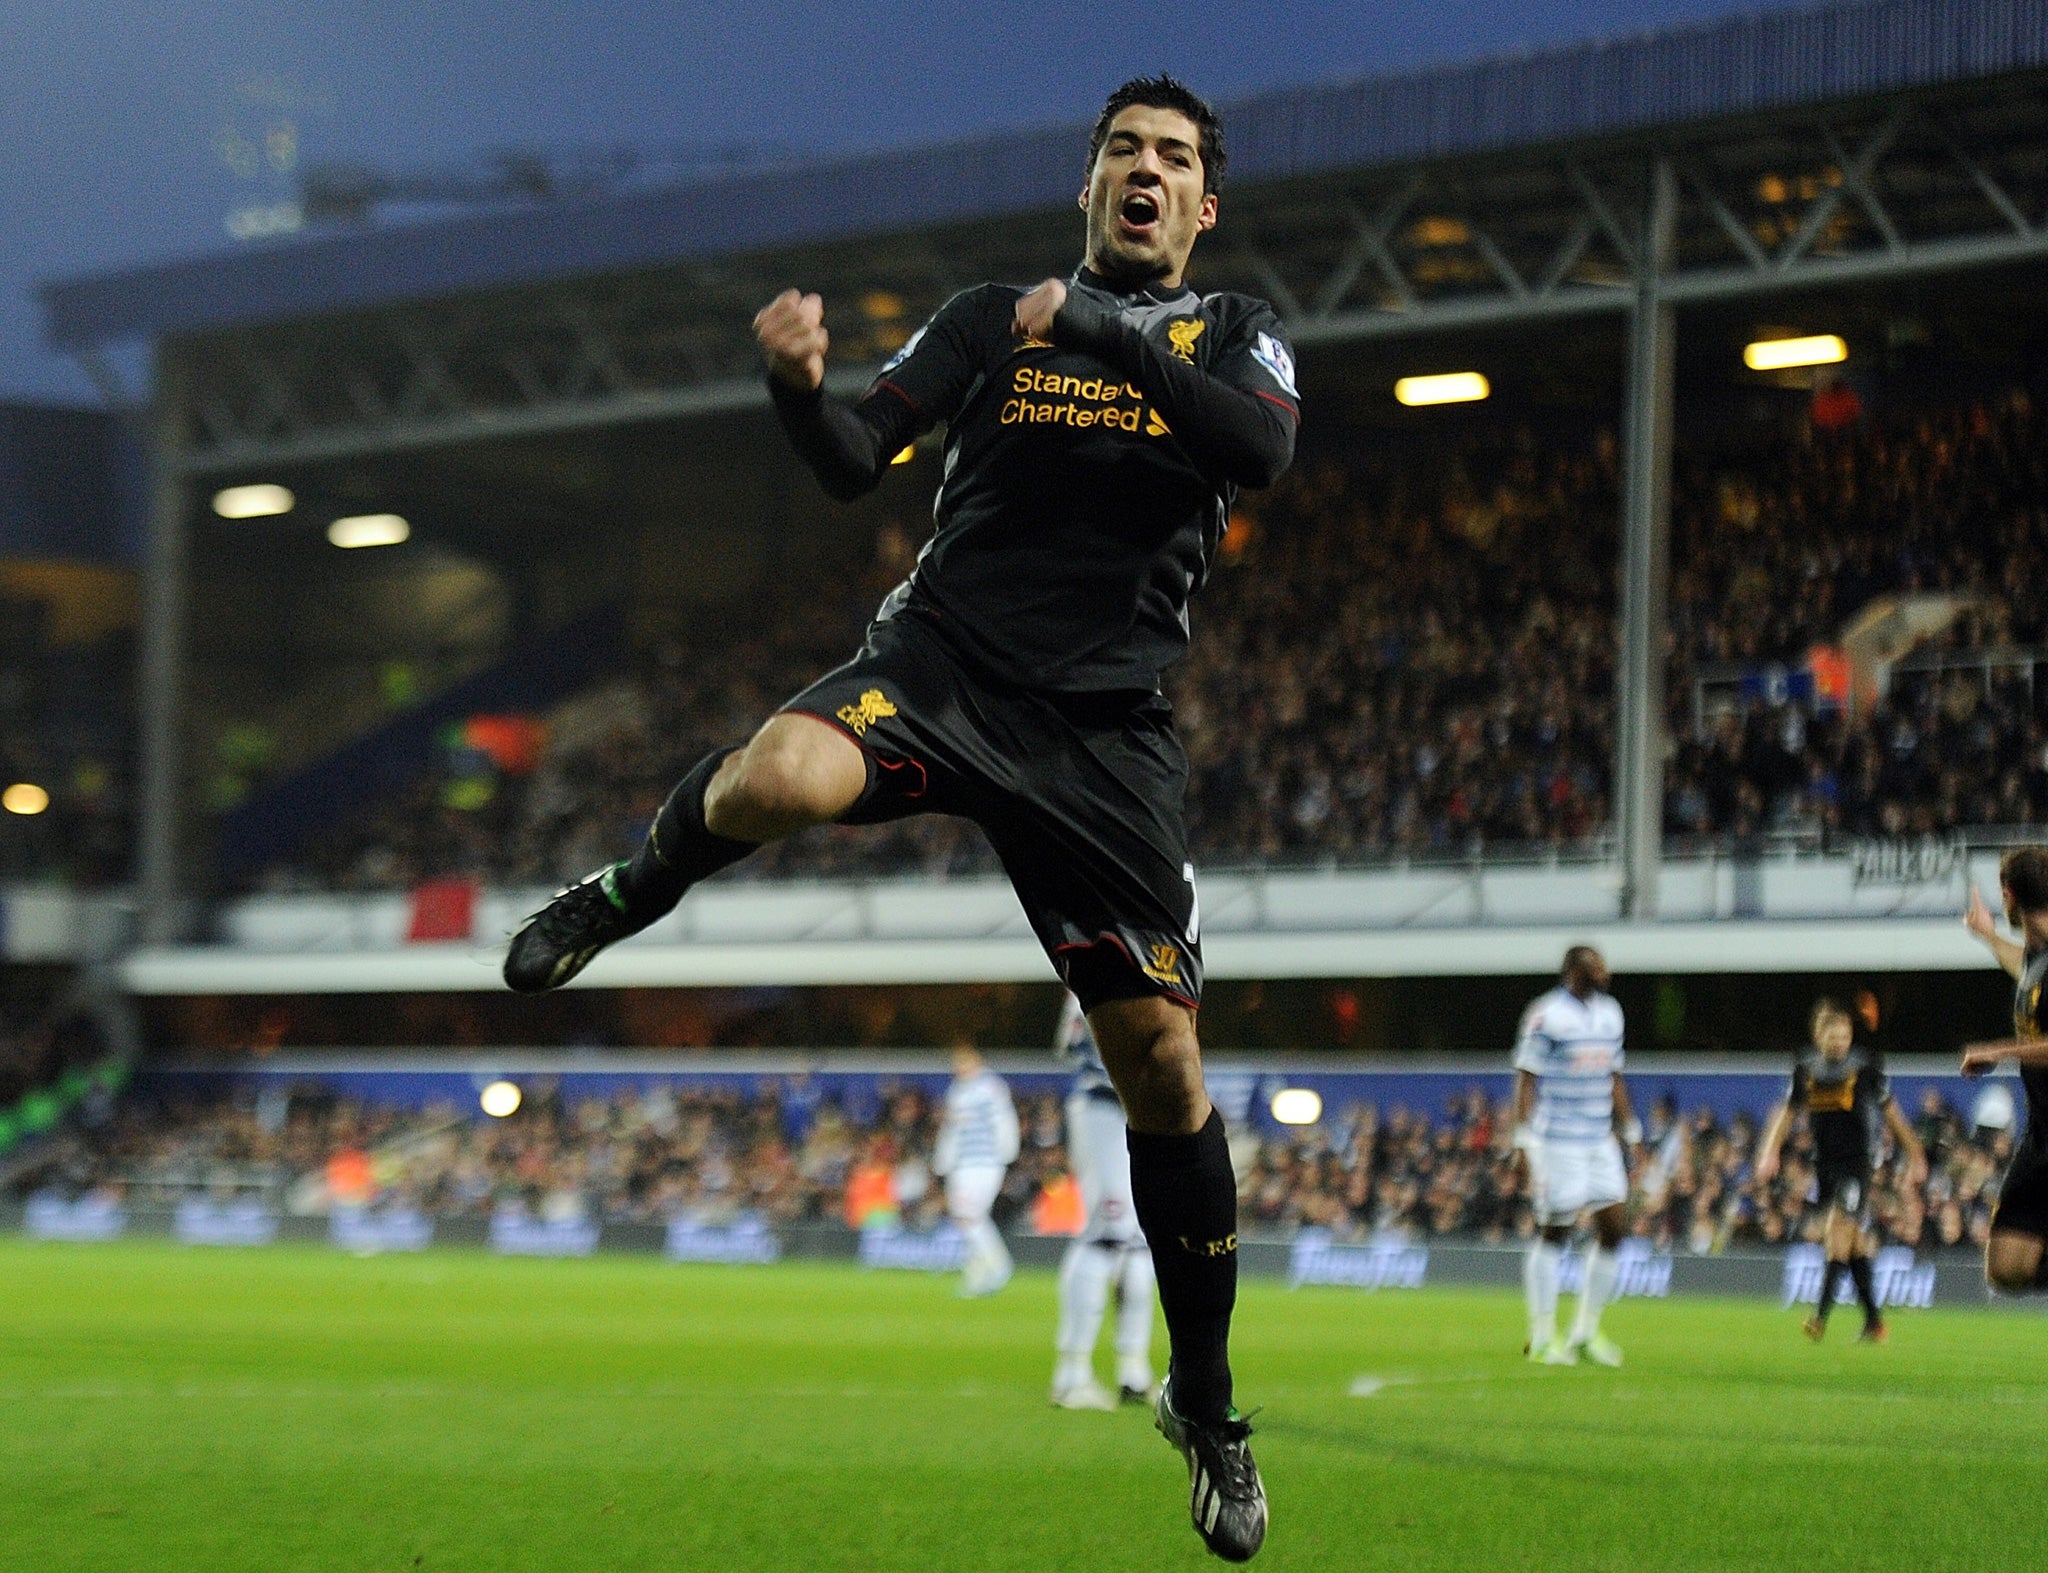 Luis Suarez’s will to win is outshining his faults